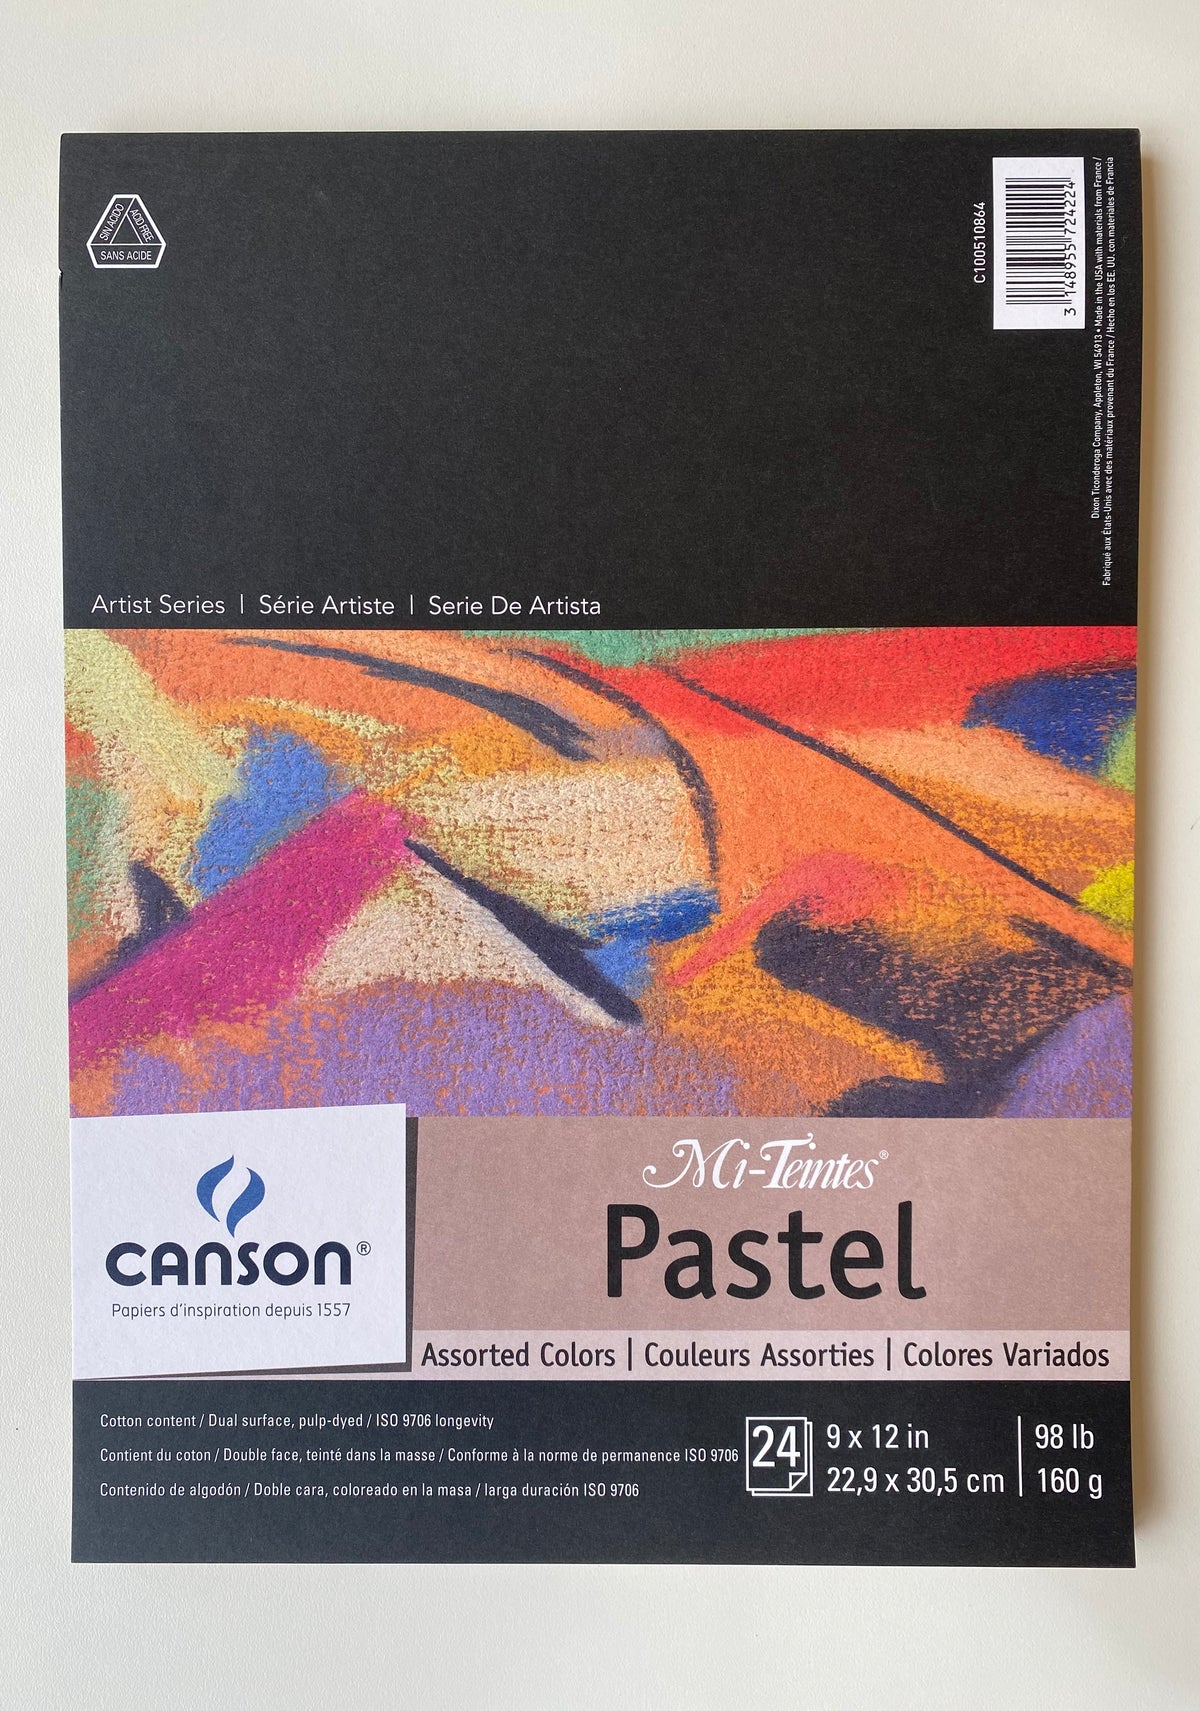 PAPER - Canson, Mi-Teintes Pastel Paper Pad (assorted colors ) 9 x 12 in, 160g